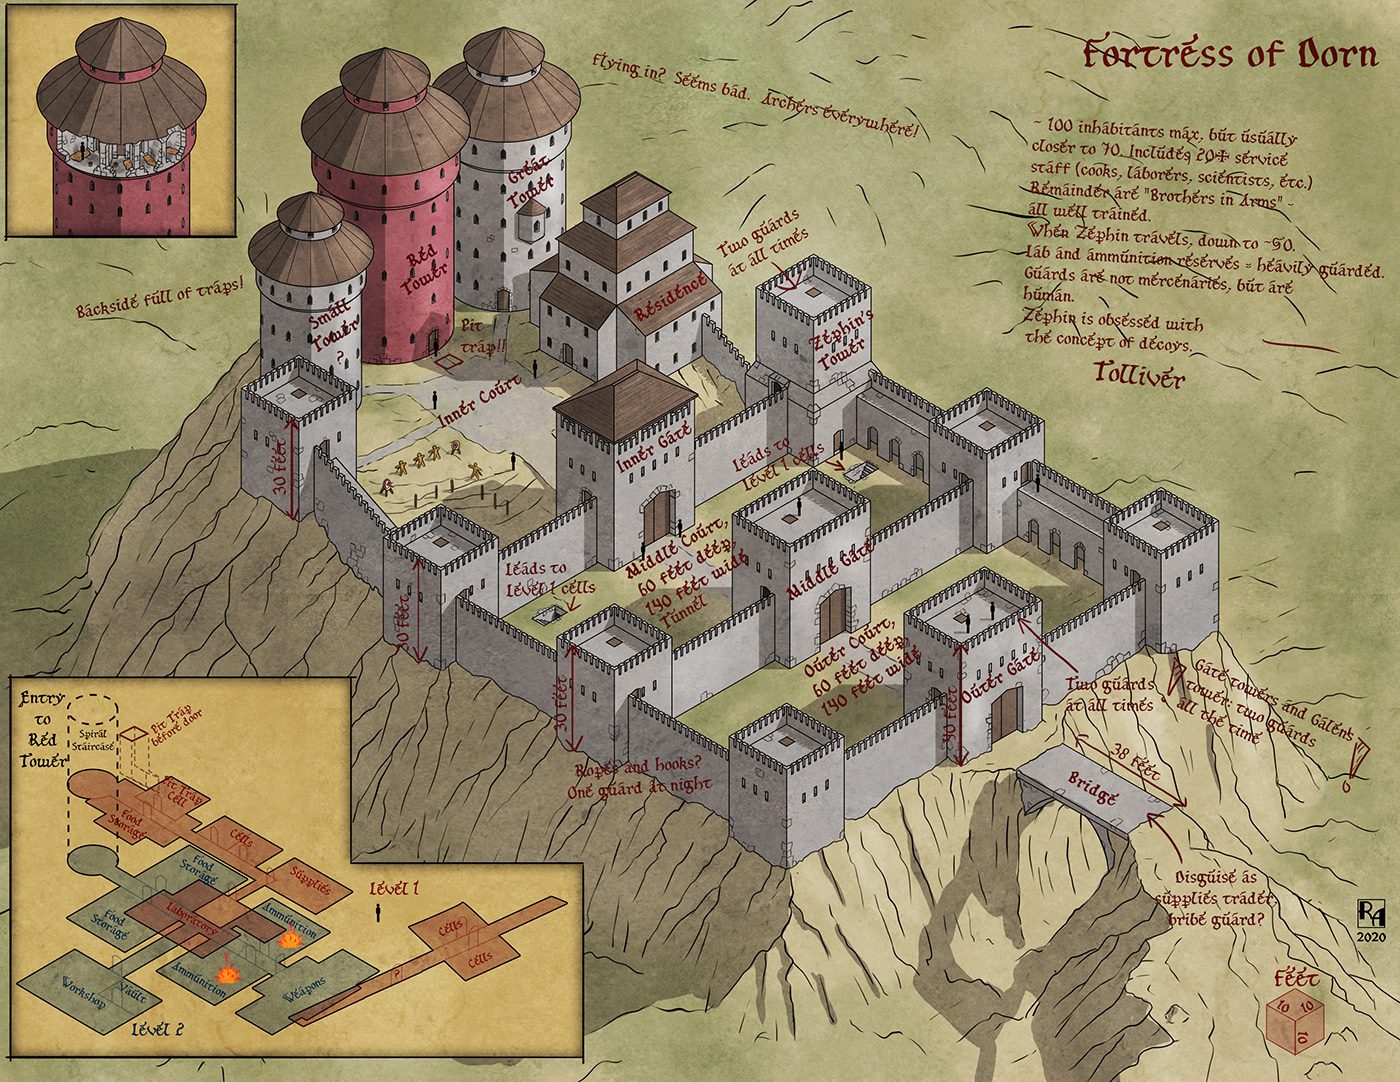 A commissioned map, showing a fortress drawn by a former prisoner. 